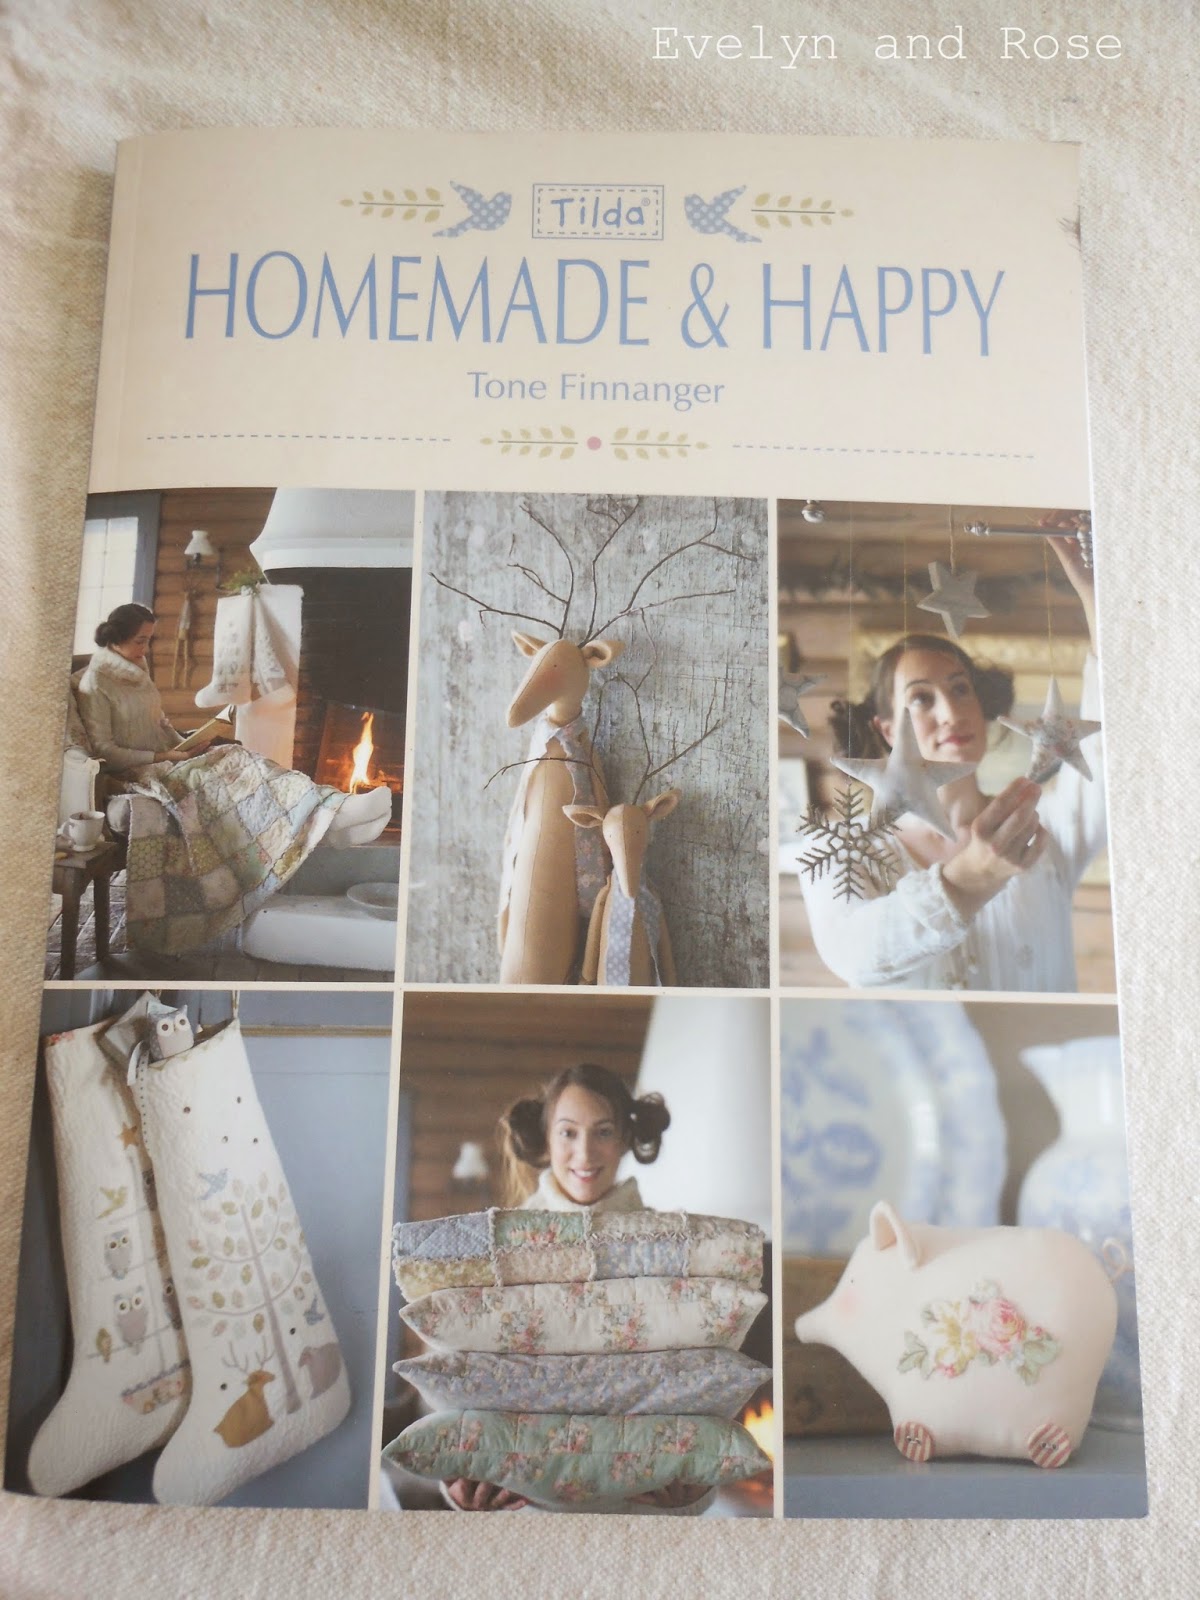 Evelyn and Rose: Tilda book Homemade and Happy